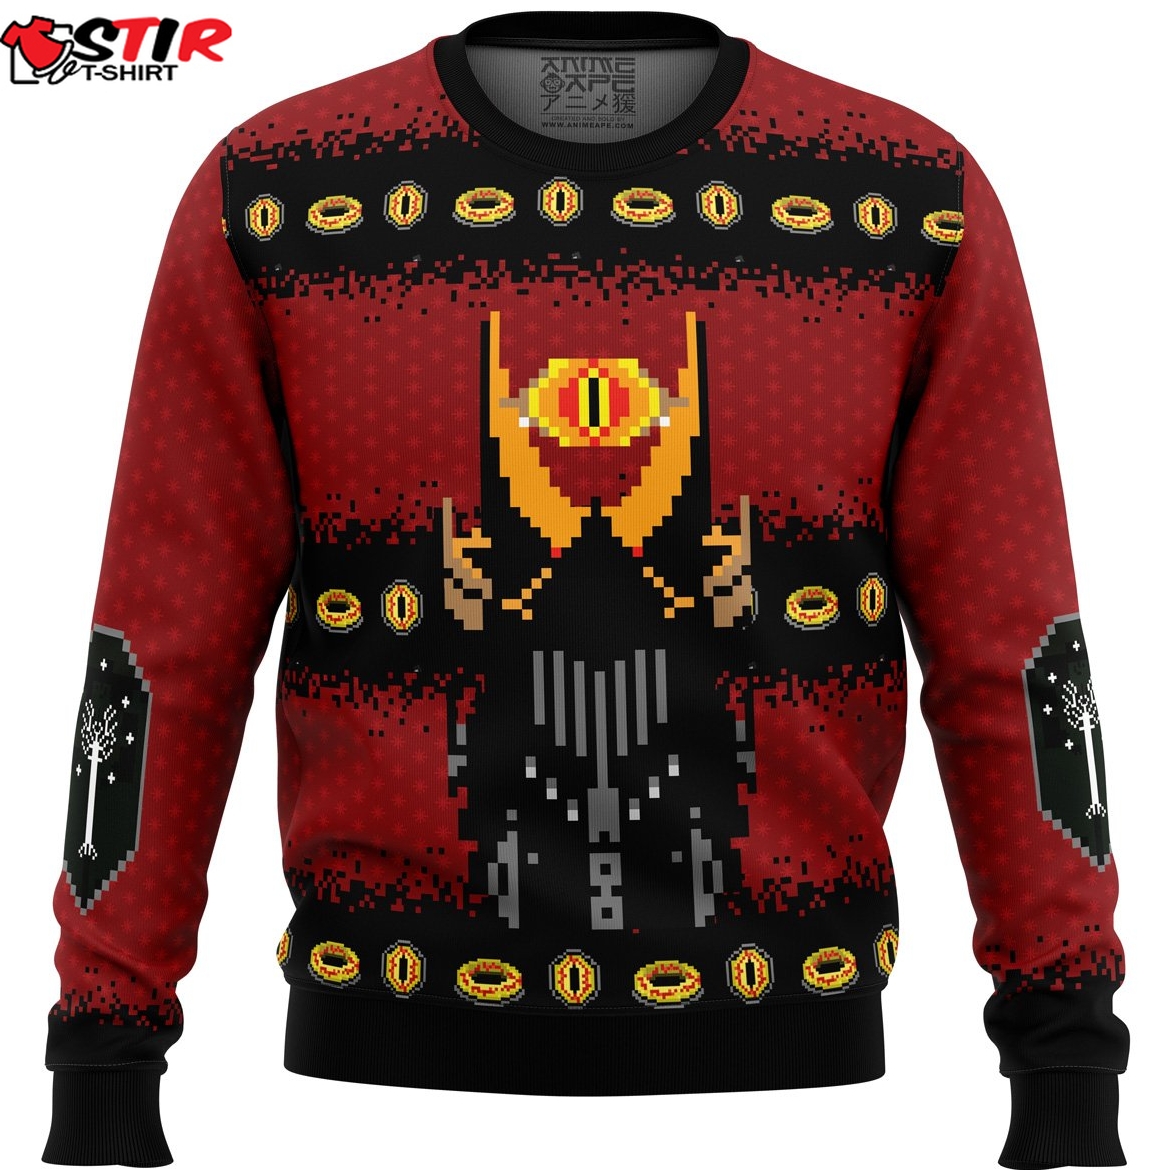 The Lord Of The Rings Christmas Ugly Christmas Sweater Stirtshirt